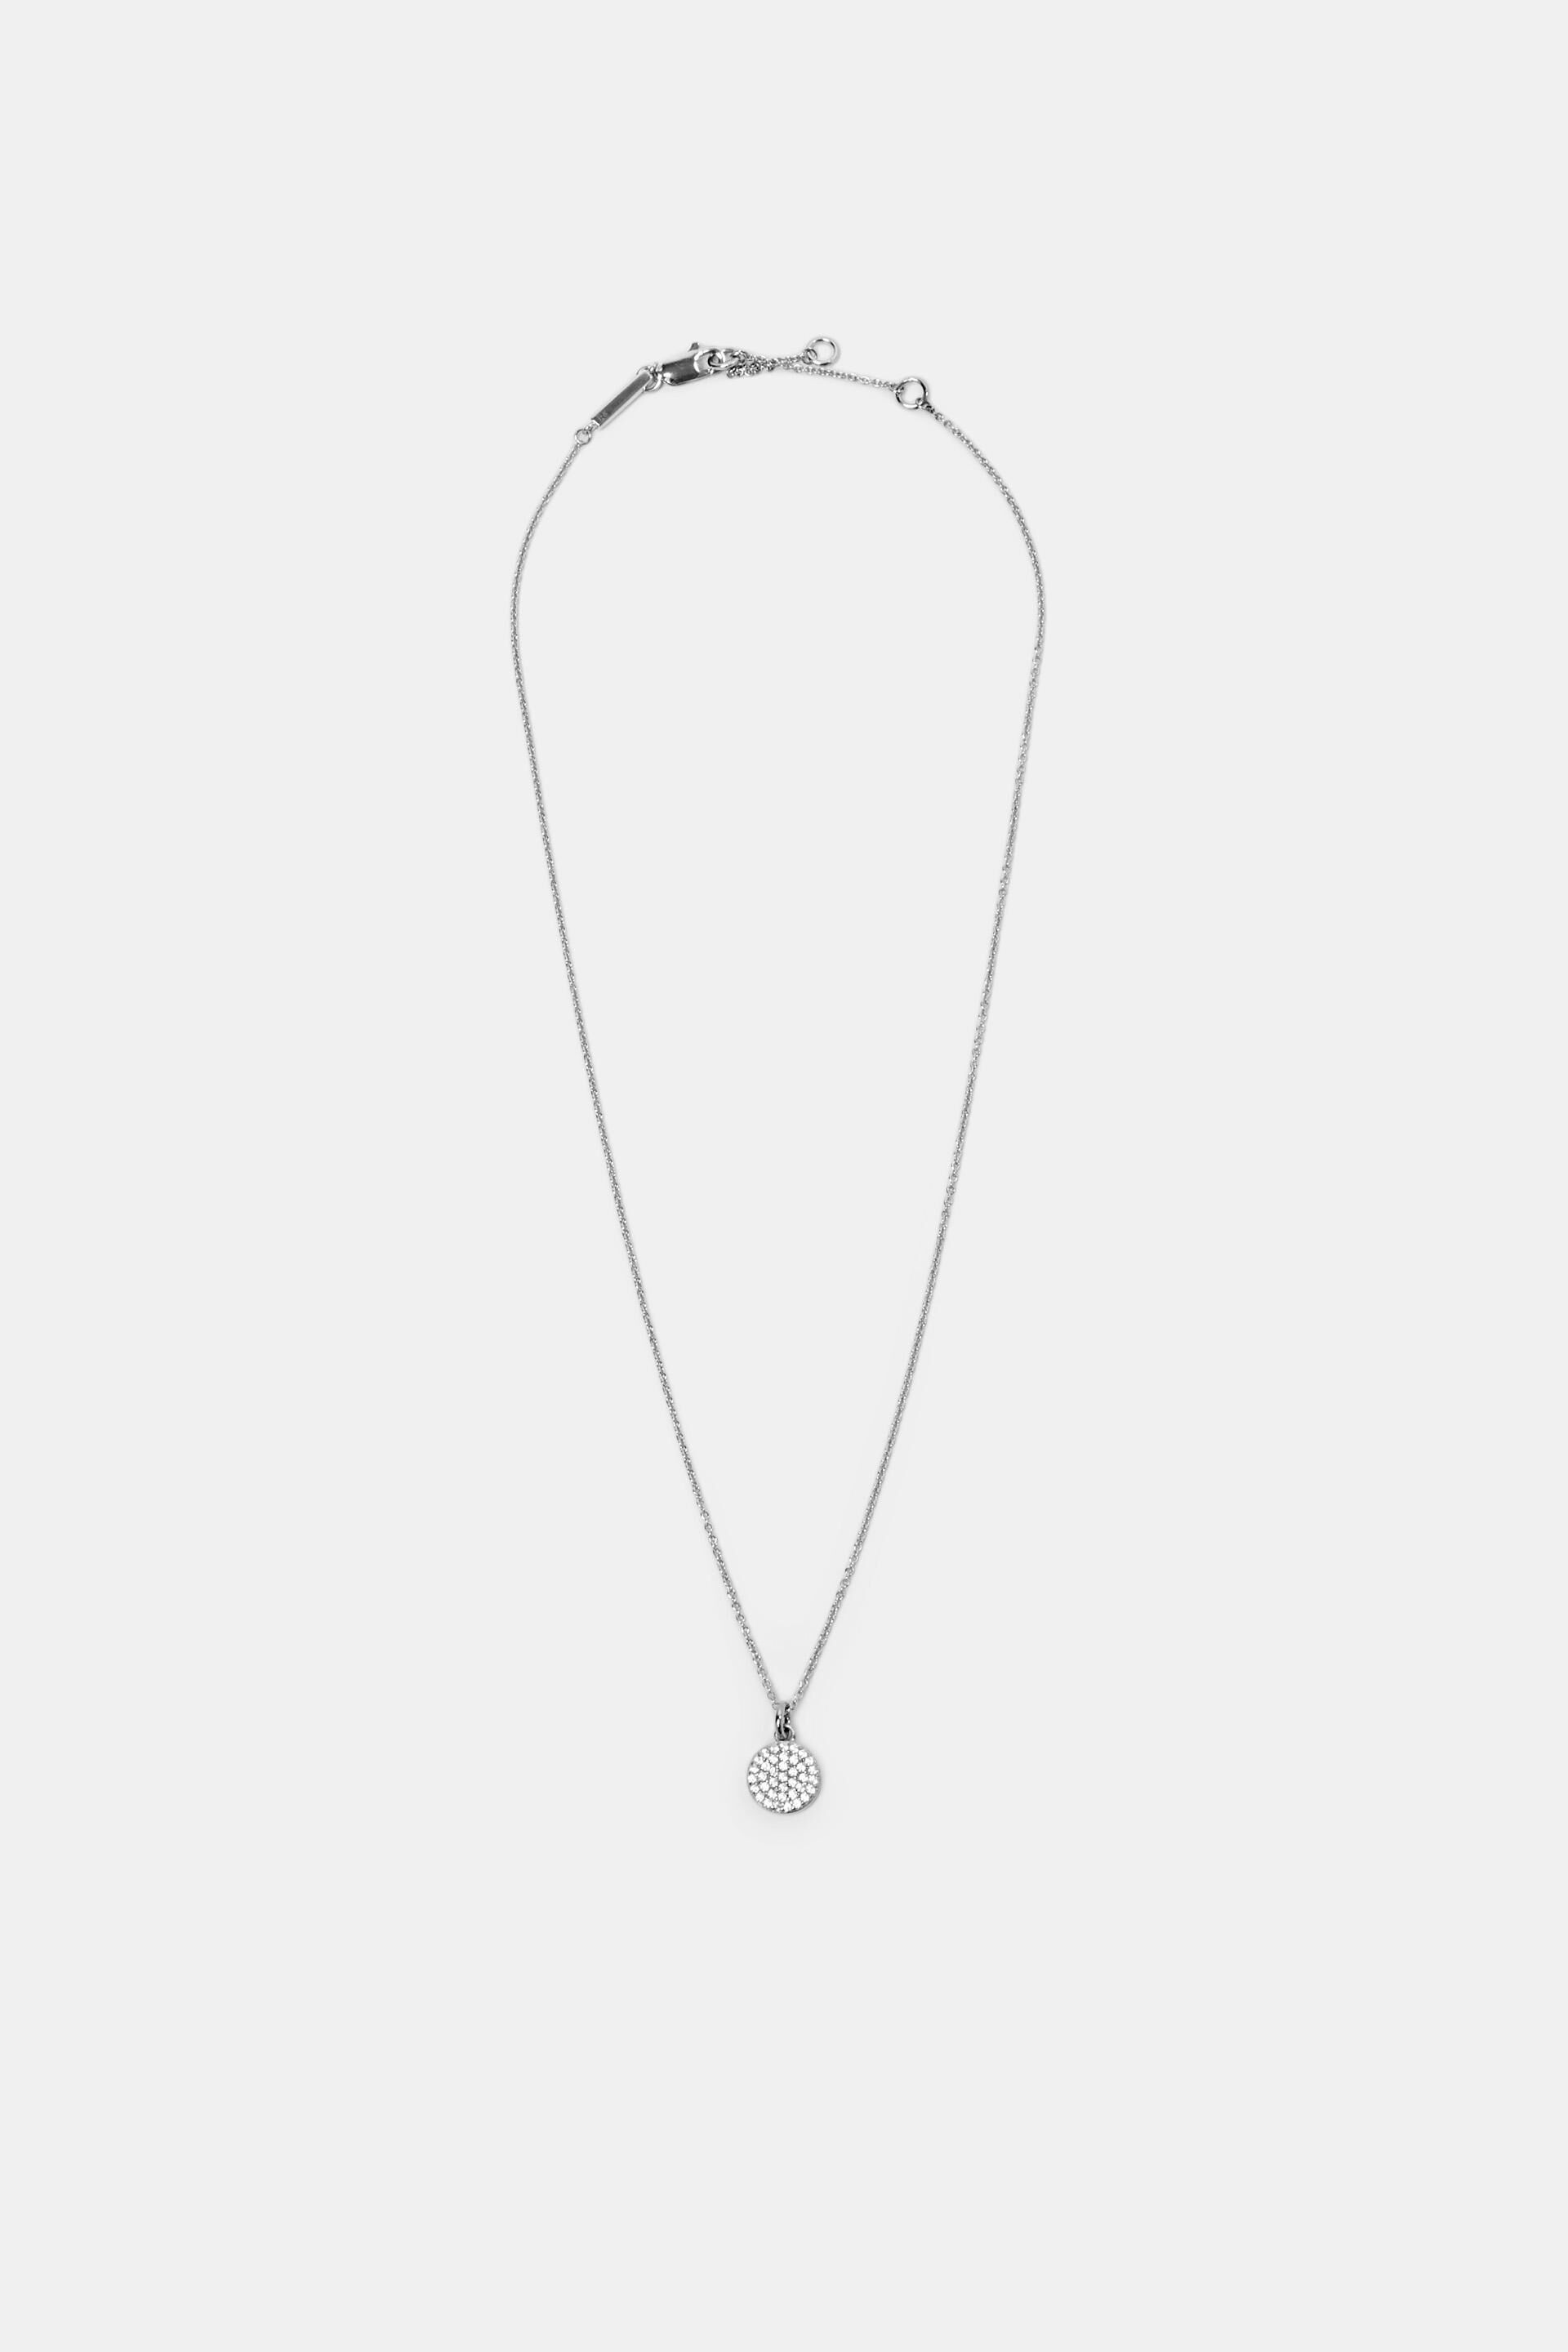 Esprit Online Store Necklace with zirconia pendant, sterling silver